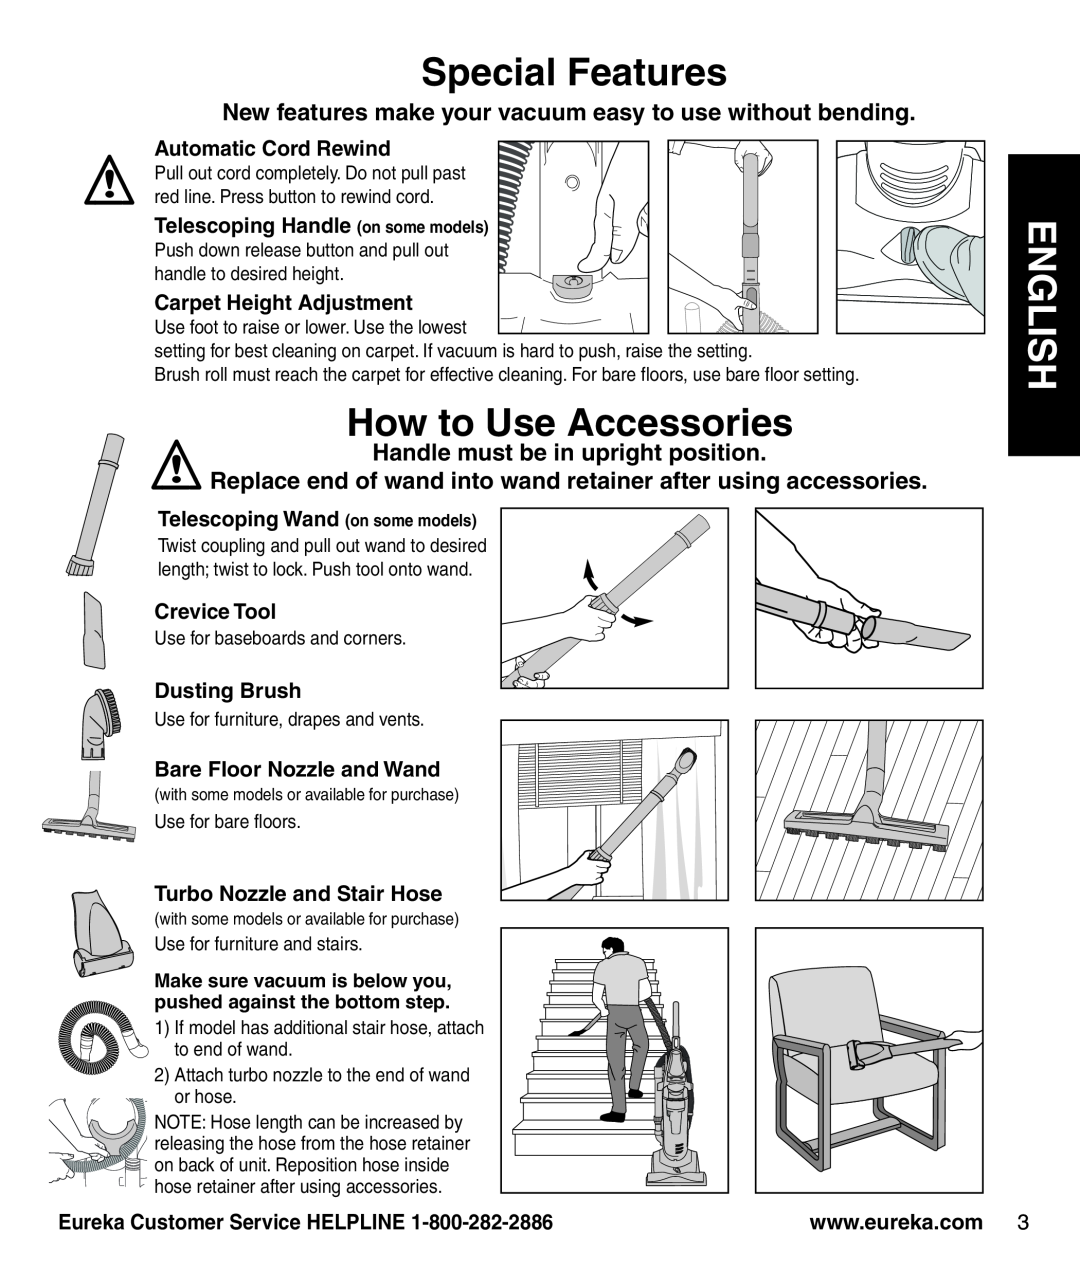 Eureka 4242A Special Features, How to Use Accessories, New features make your vacuum easy to use without bending, English 